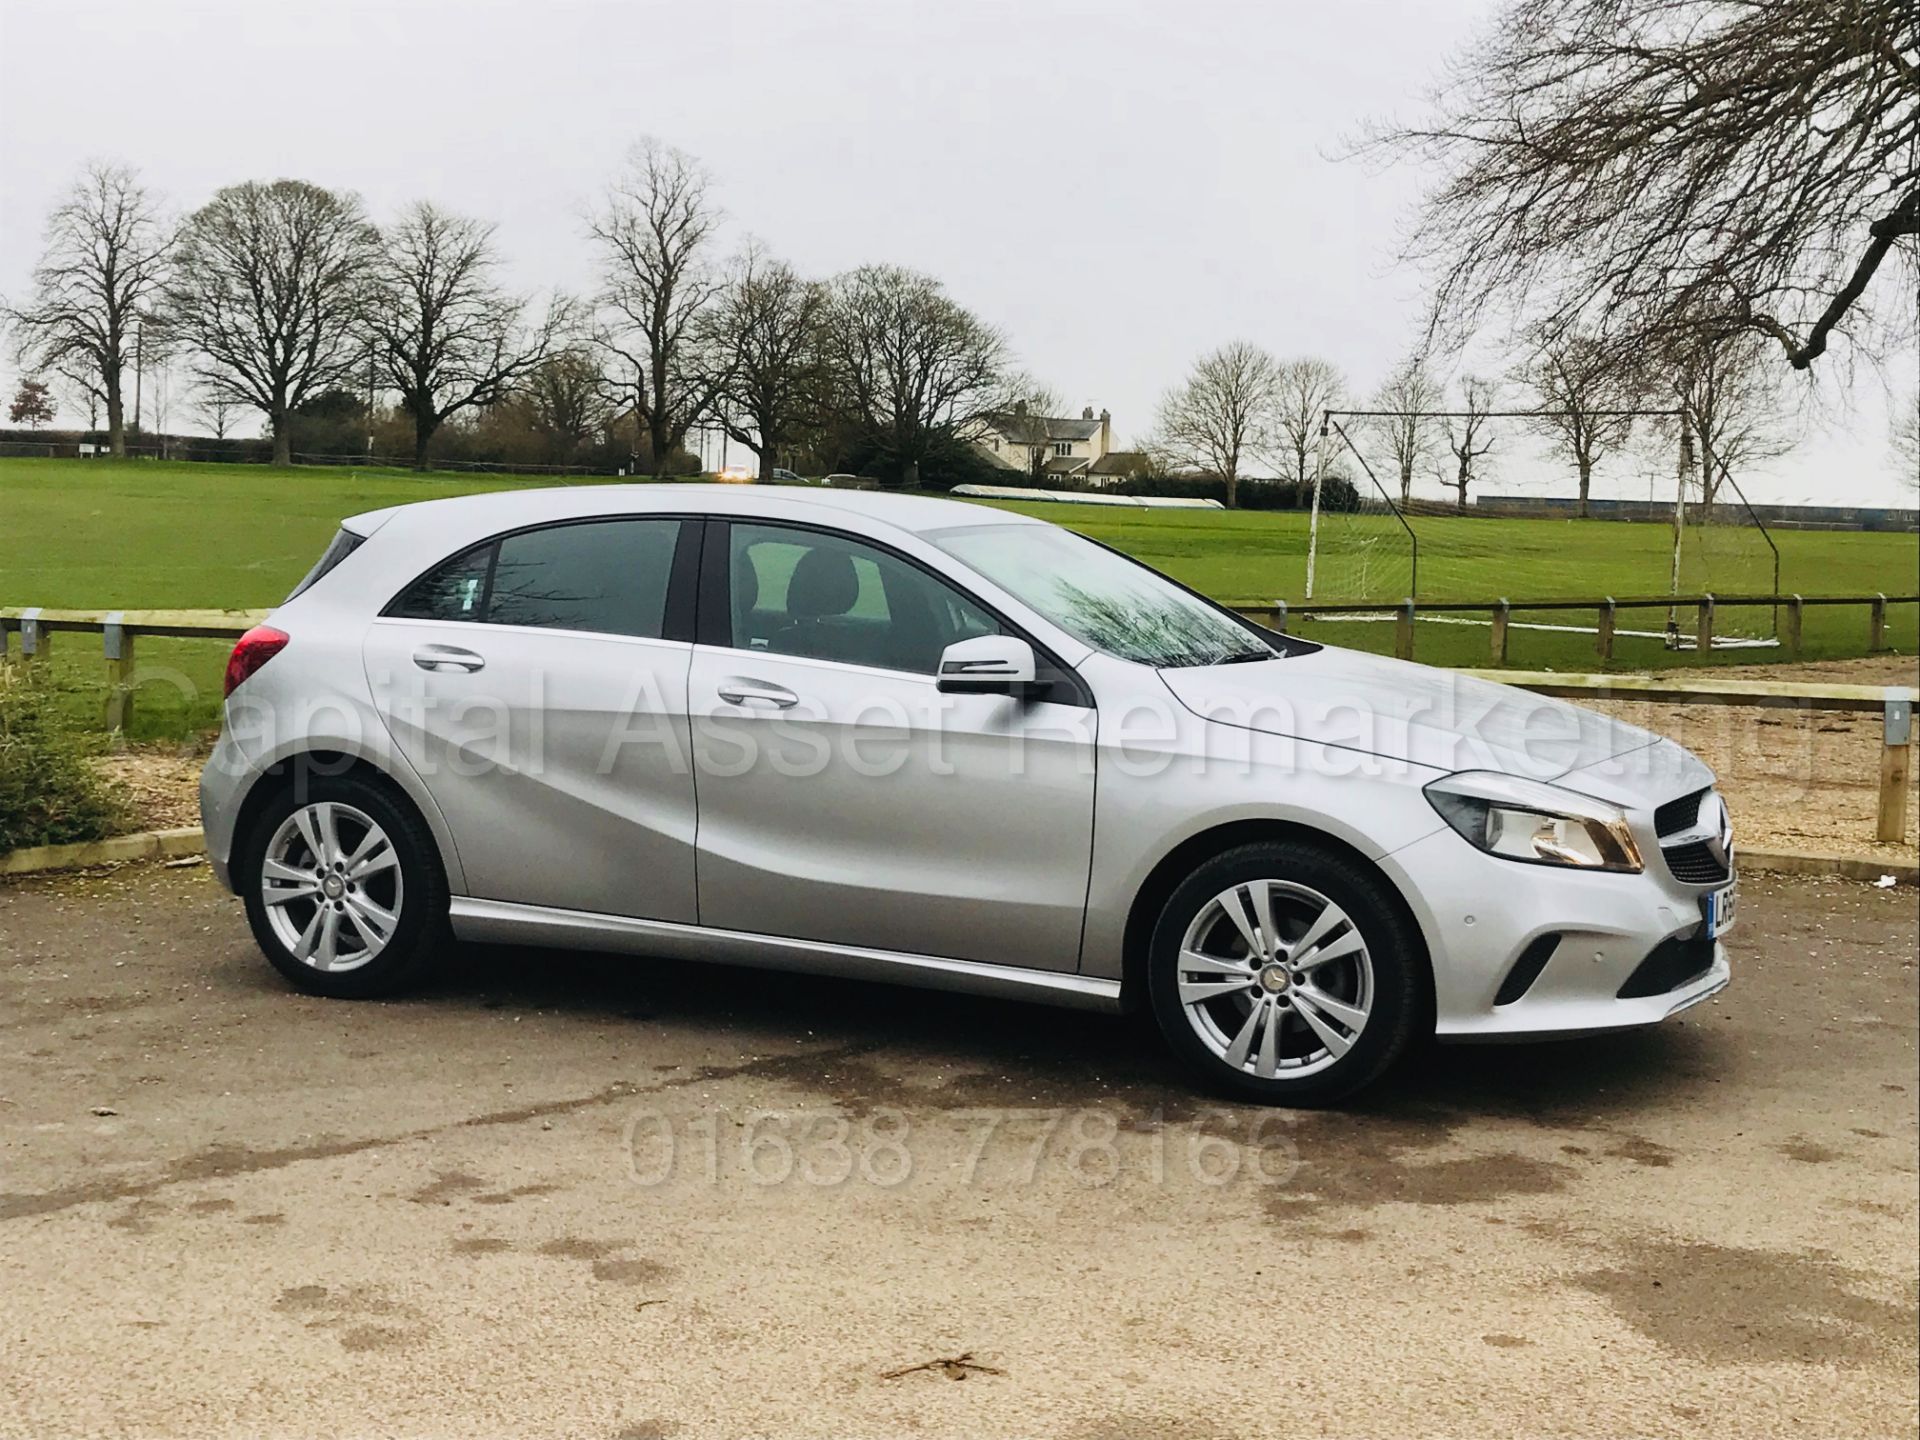 MERCEDES-BENZ A180D 'SPORT' (2017 MODEL) '7G TRONIC AUTO - LEATHER - SAT NAV' (1 OWNER FROM NEW) - Image 13 of 41